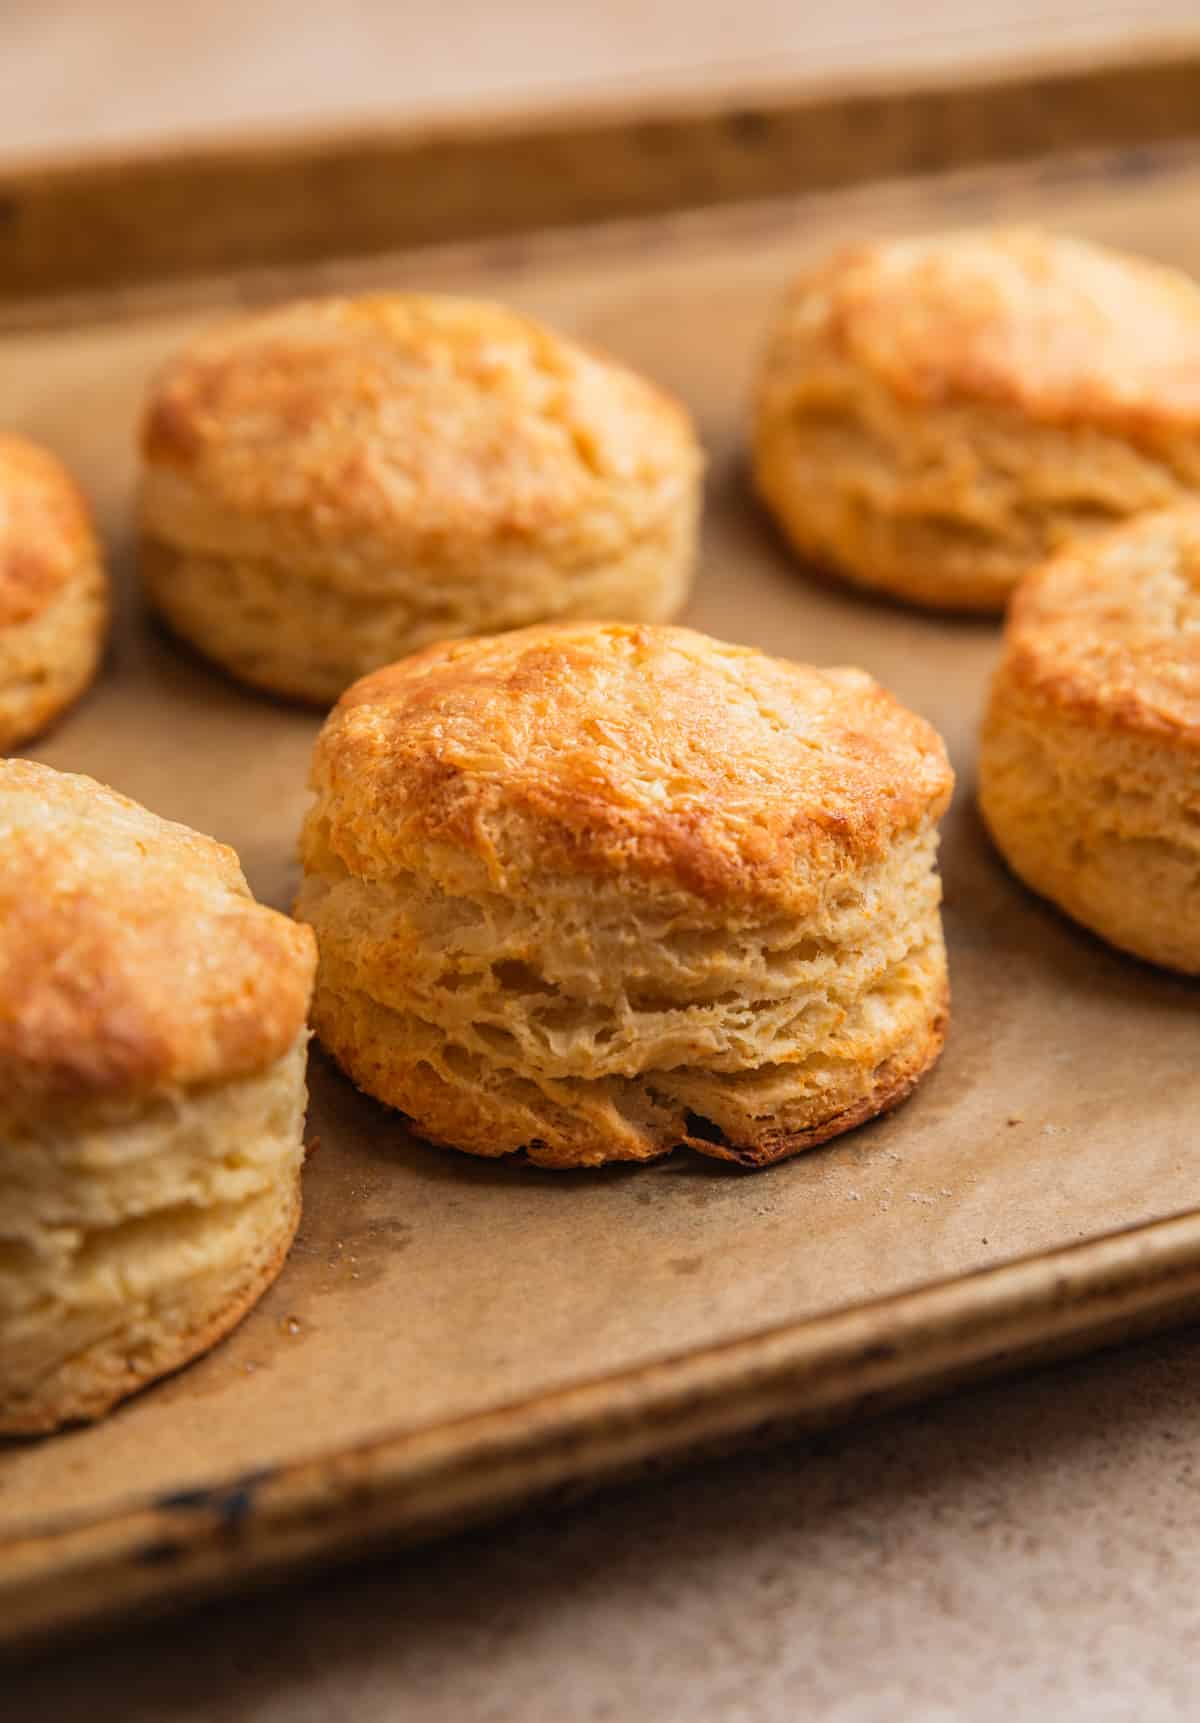 Freshly baked biscuits on parchment lined baking sheet.